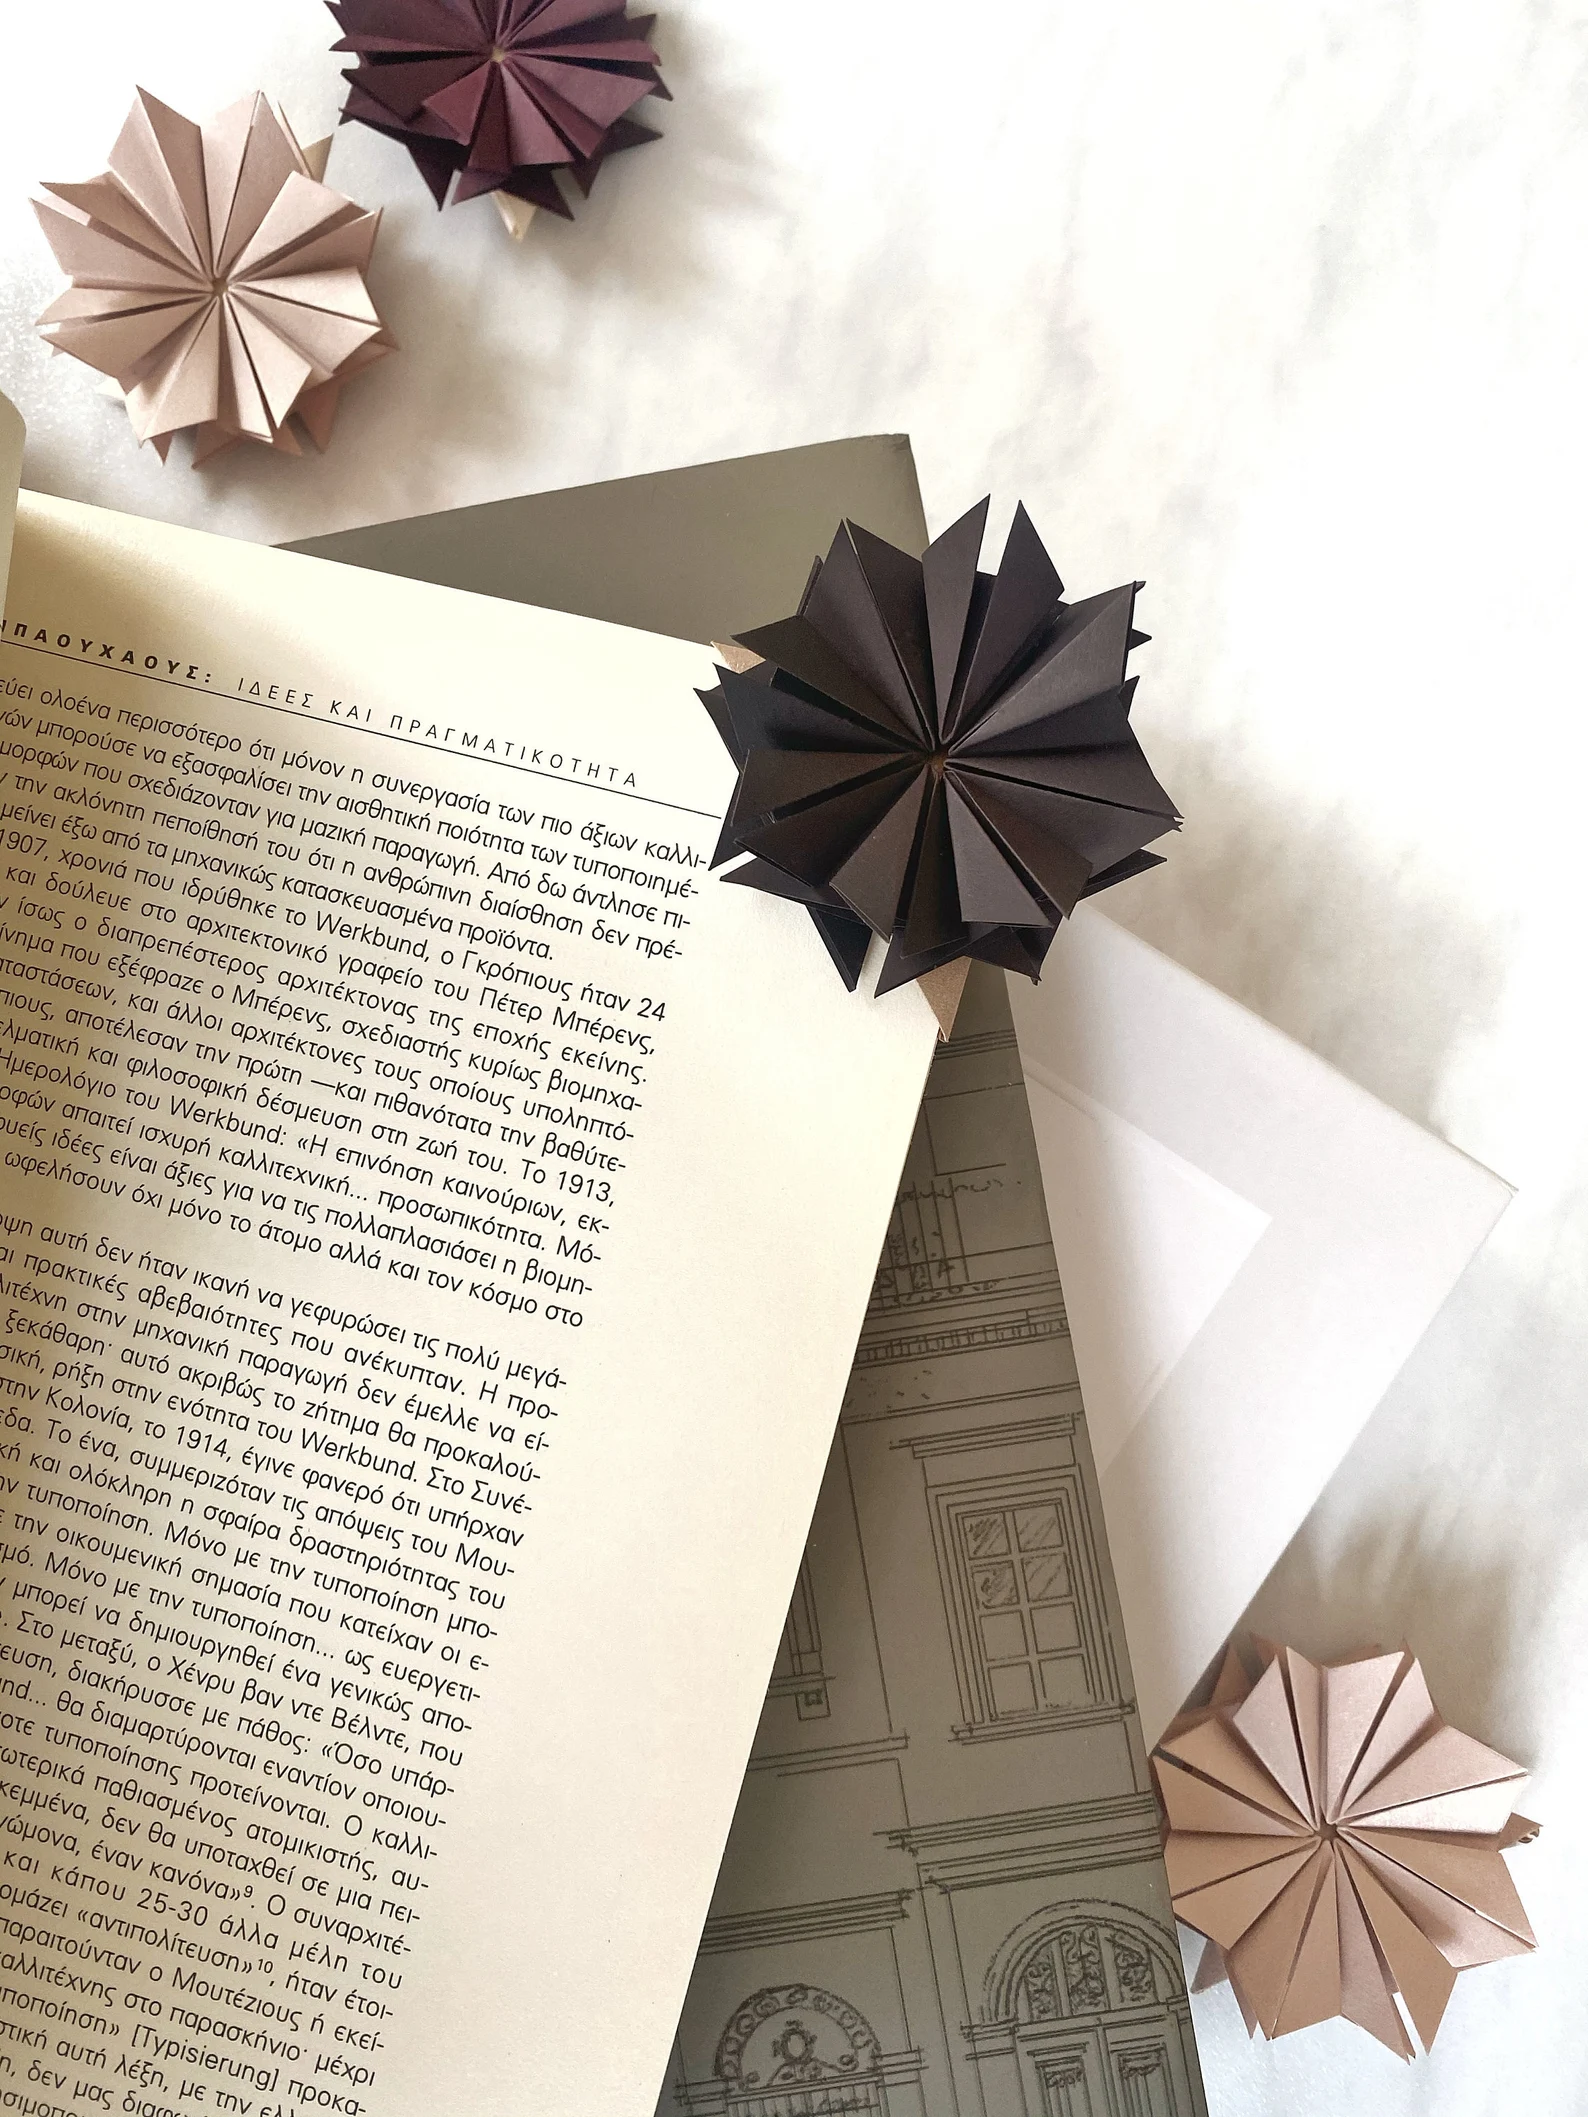 Corner bookmarks in the shape of abstract flowers